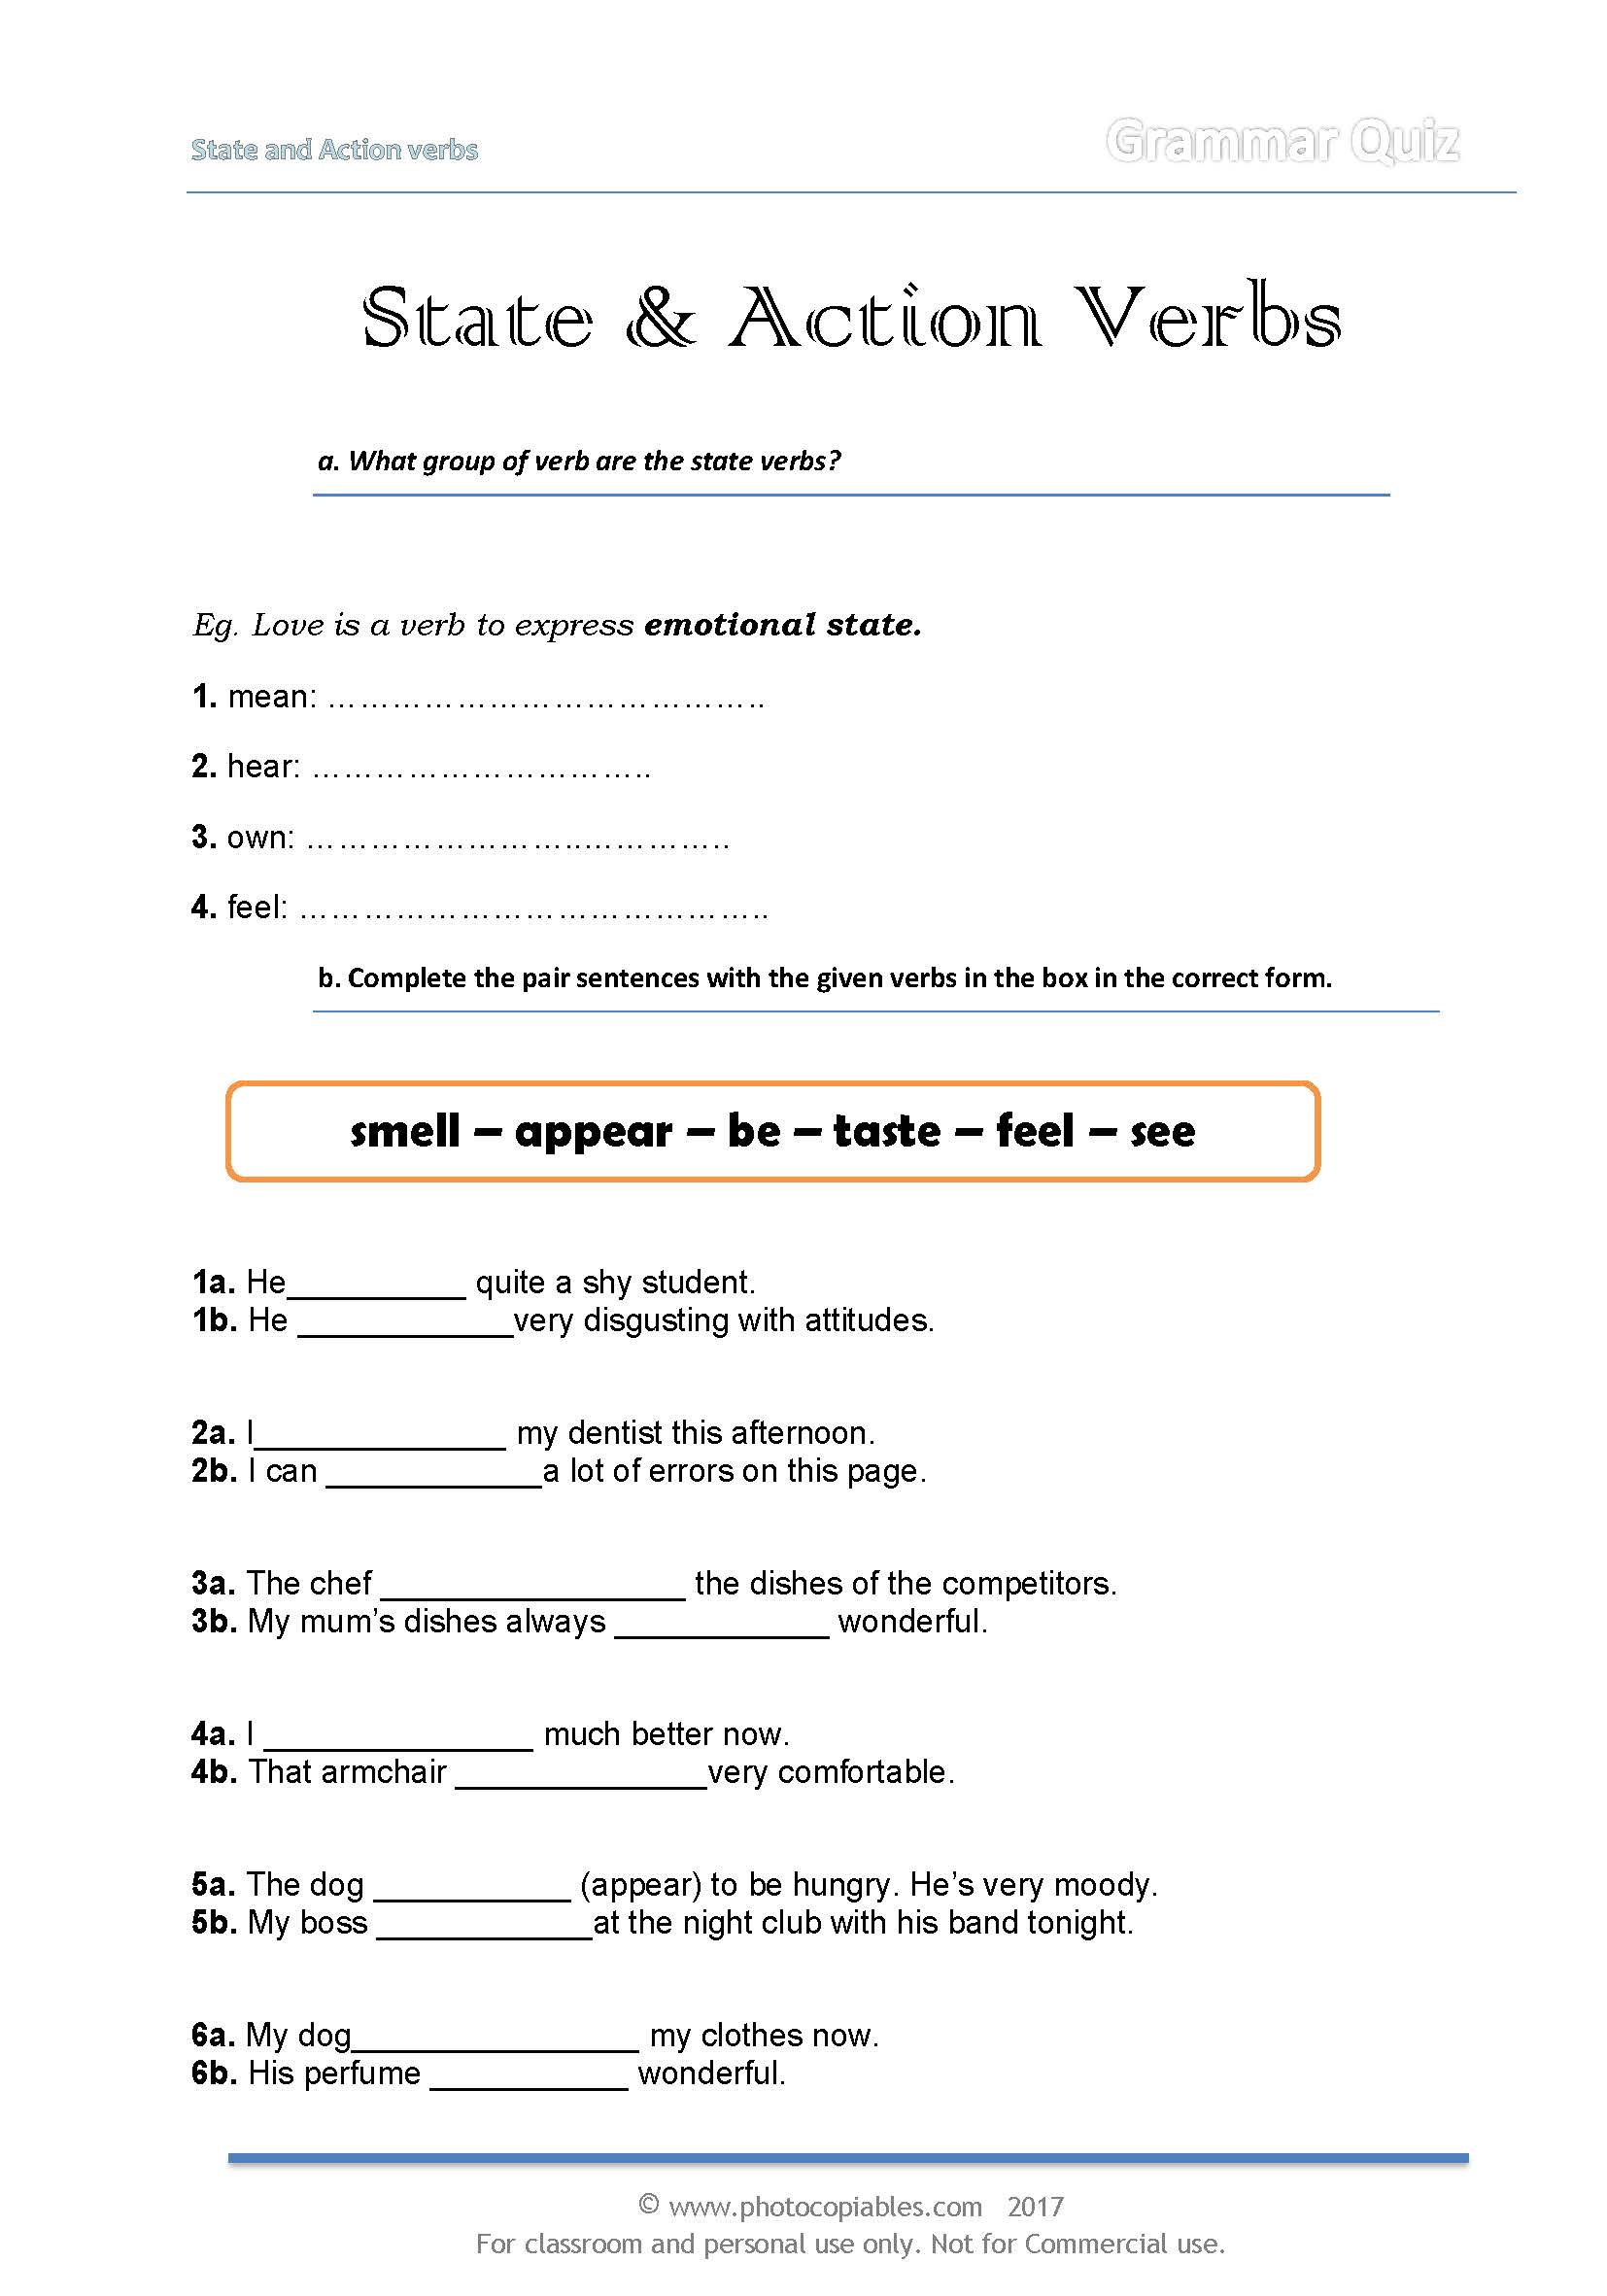 state-verbs-and-action-verbs-english-esl-worksheets-pdf-doc